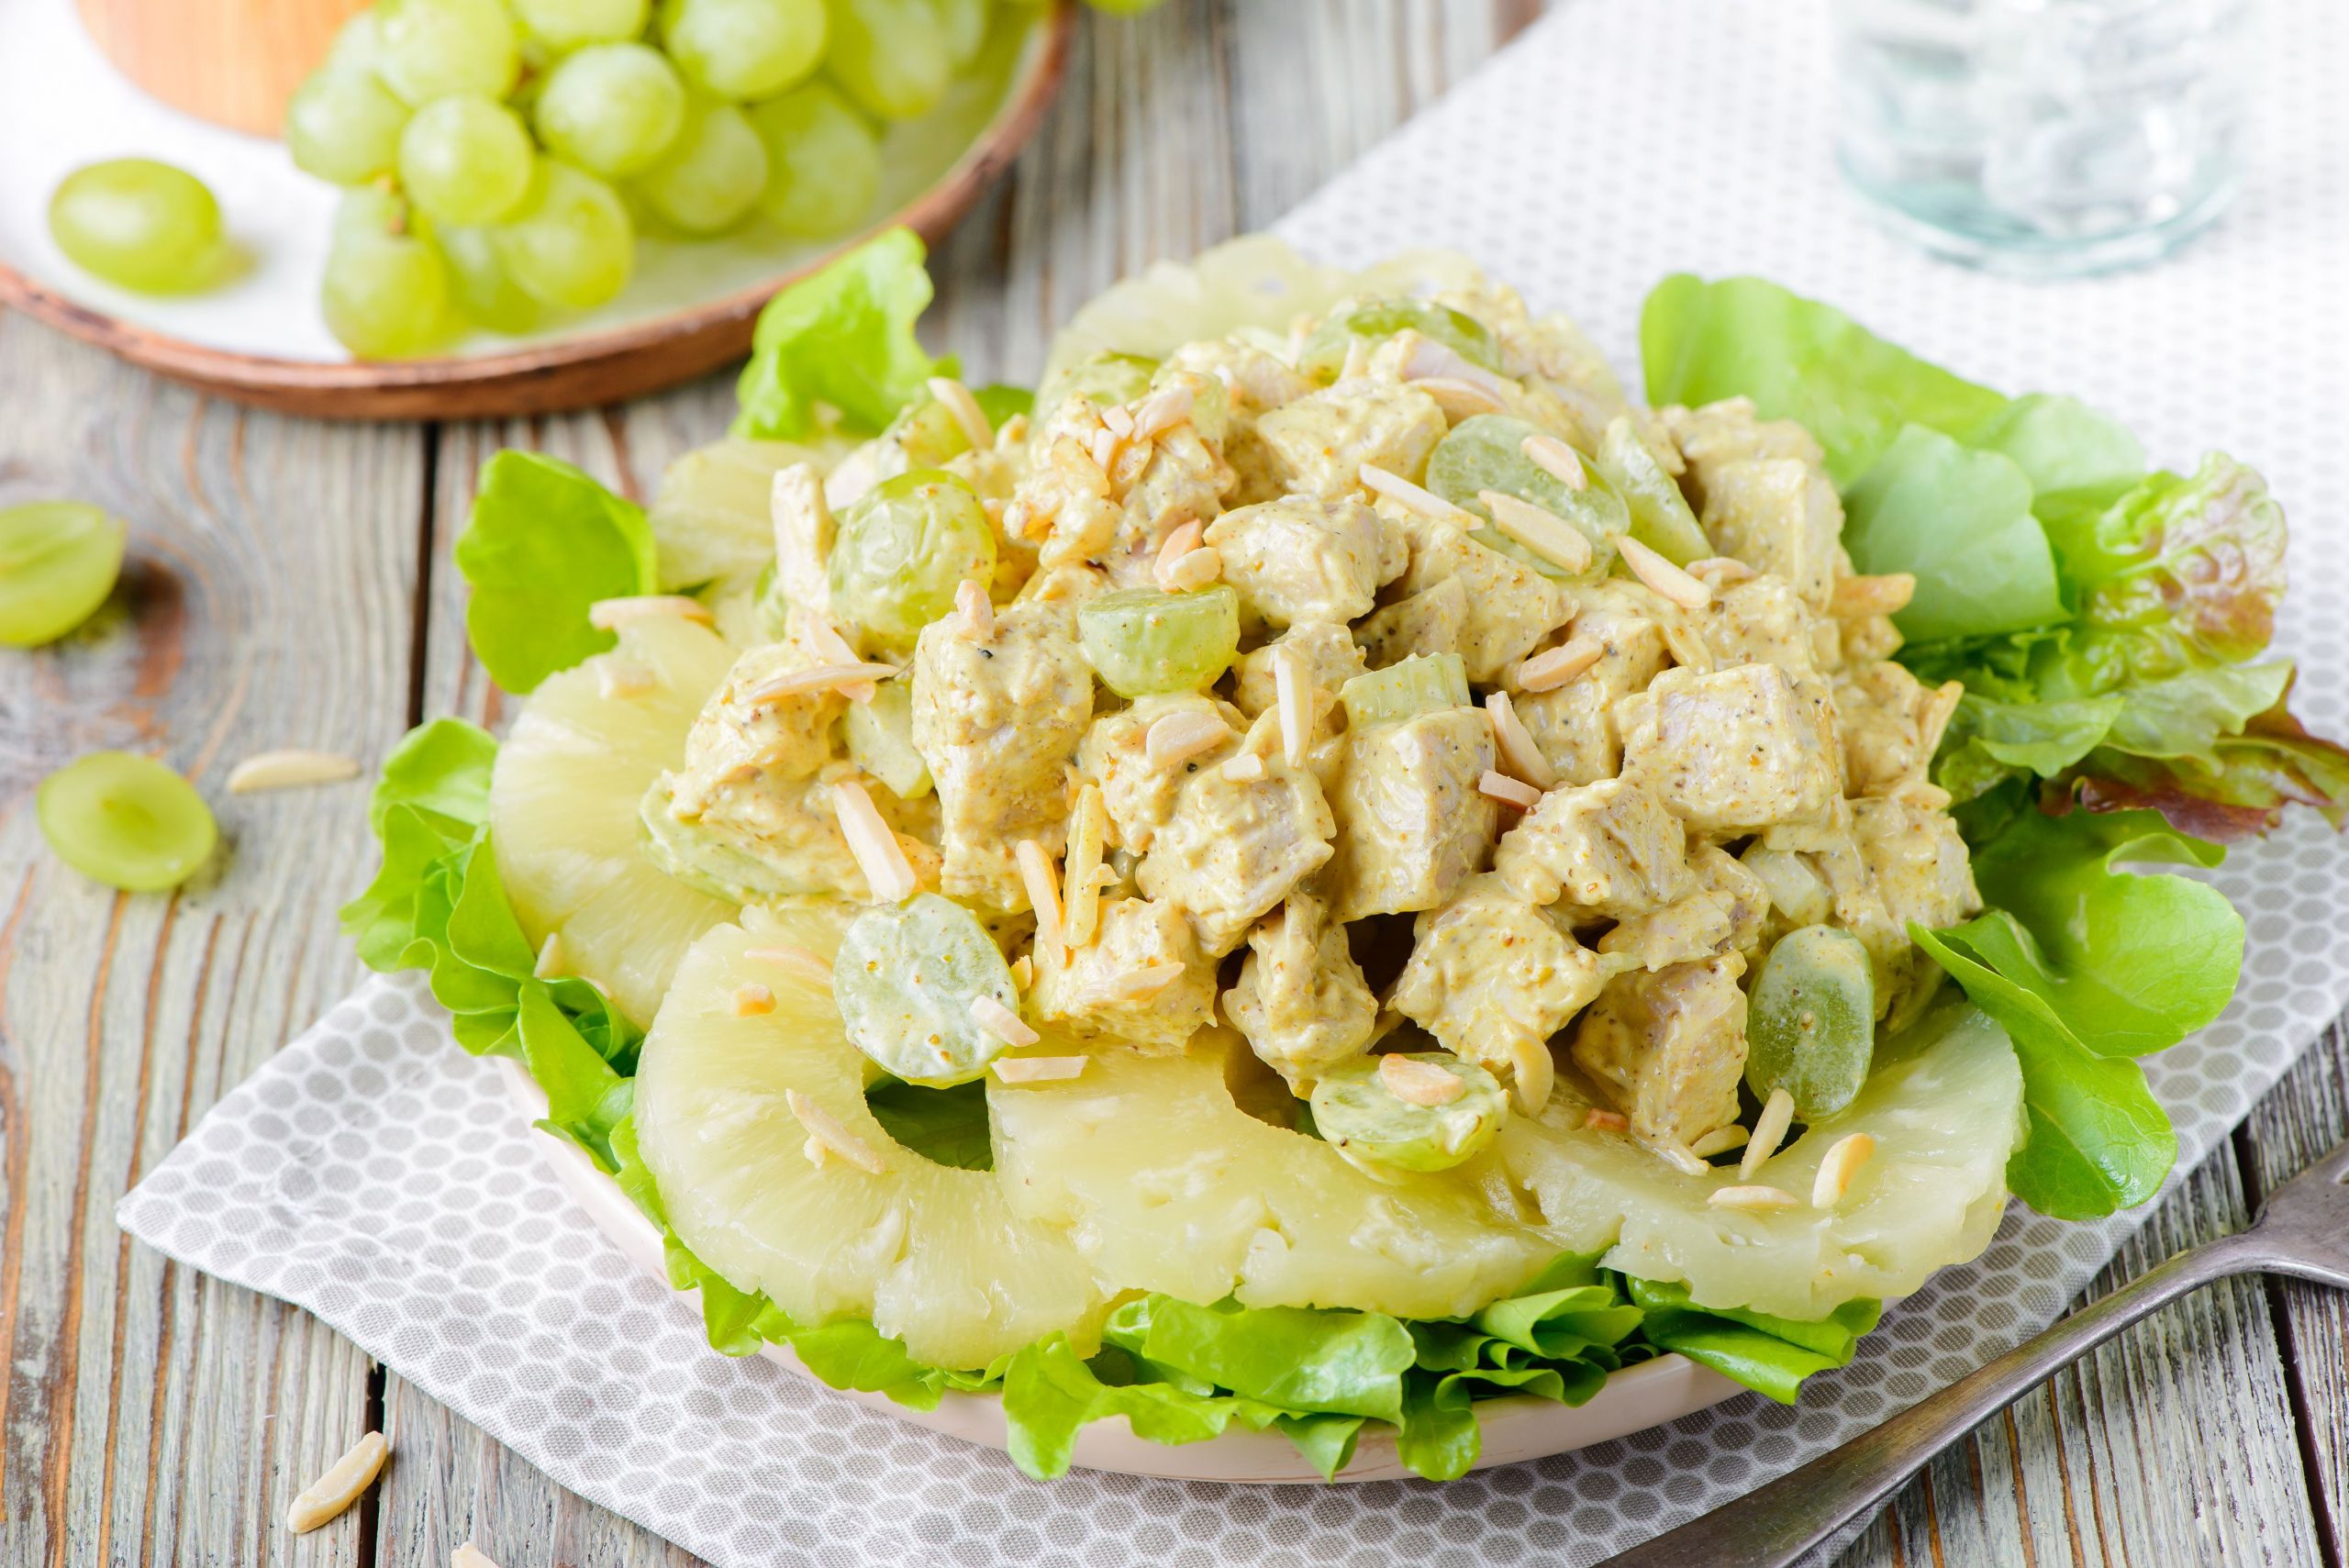 Turkey Salad With Grapes
 Special Turkey Salad Recipe With Grapes and Almonds